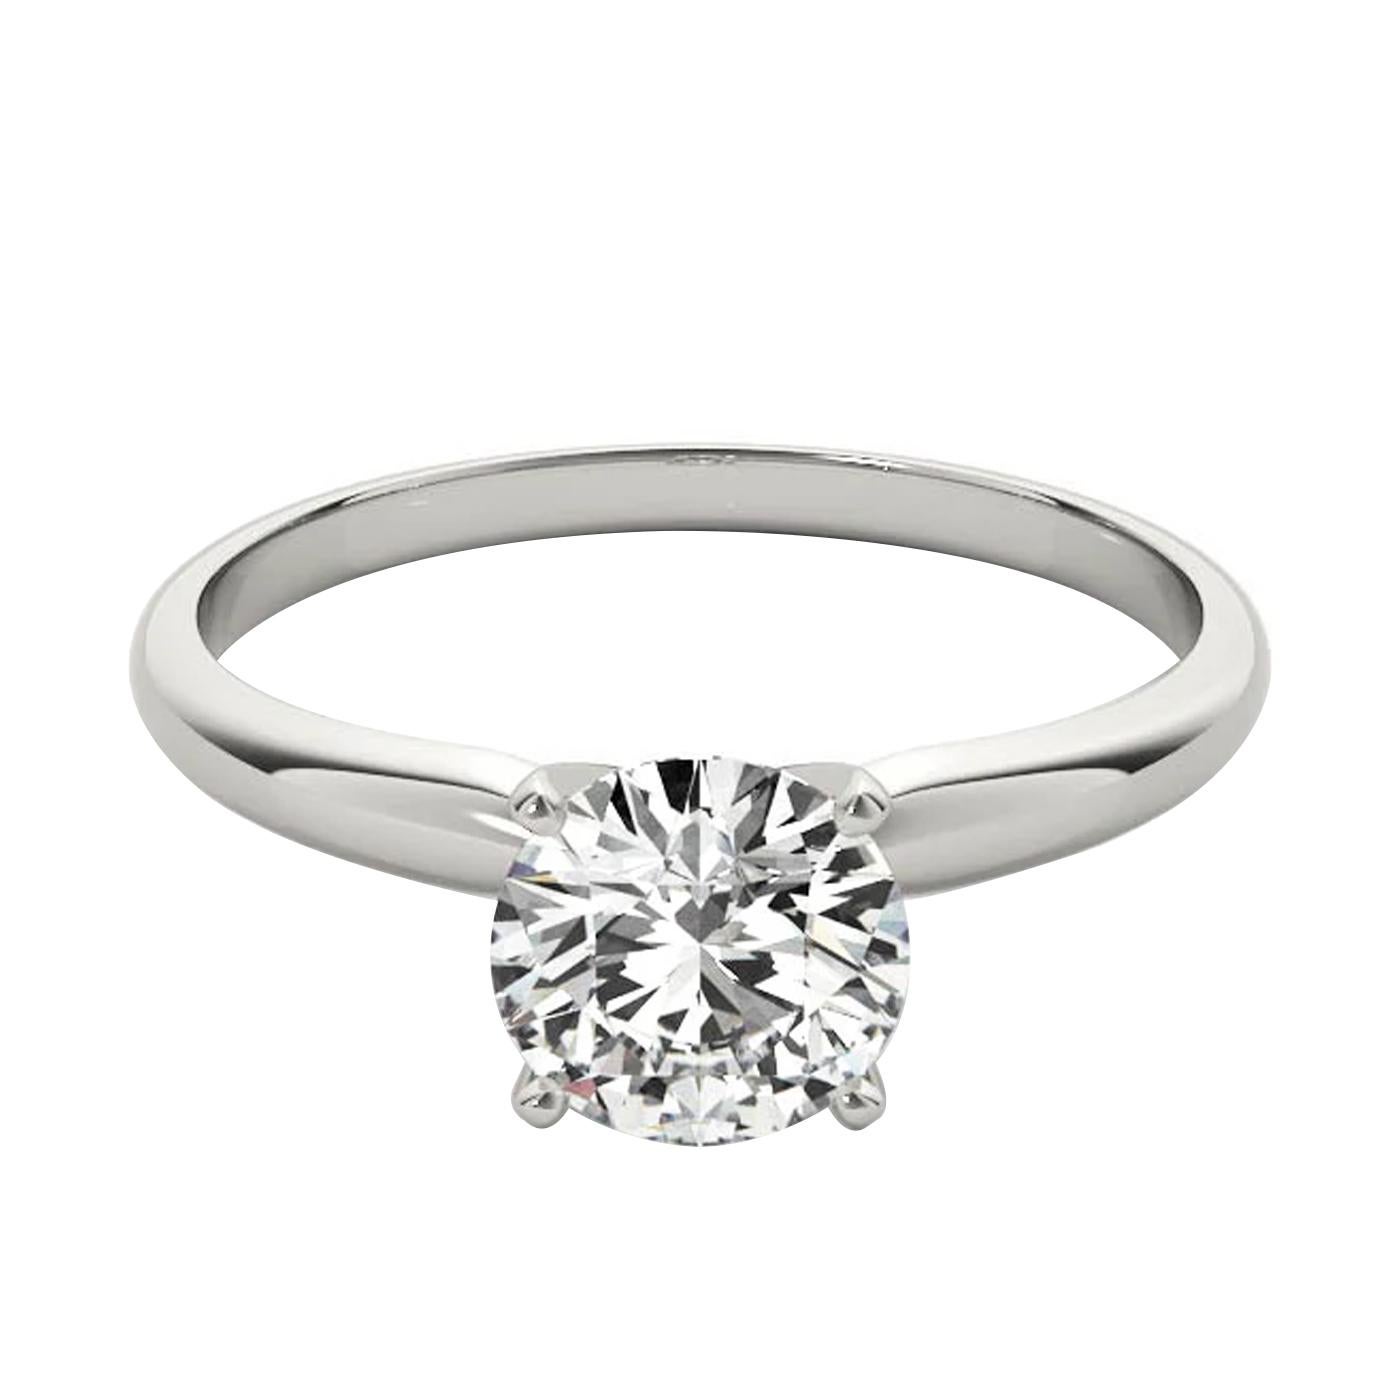 This ring features a delicate center diamond Features H color and Si1 clarity in 18K White Gold. This intricately designed ring will really look amazing on your bride-to-be’s finger and it will be a gift that she never forgets. Customize this ring